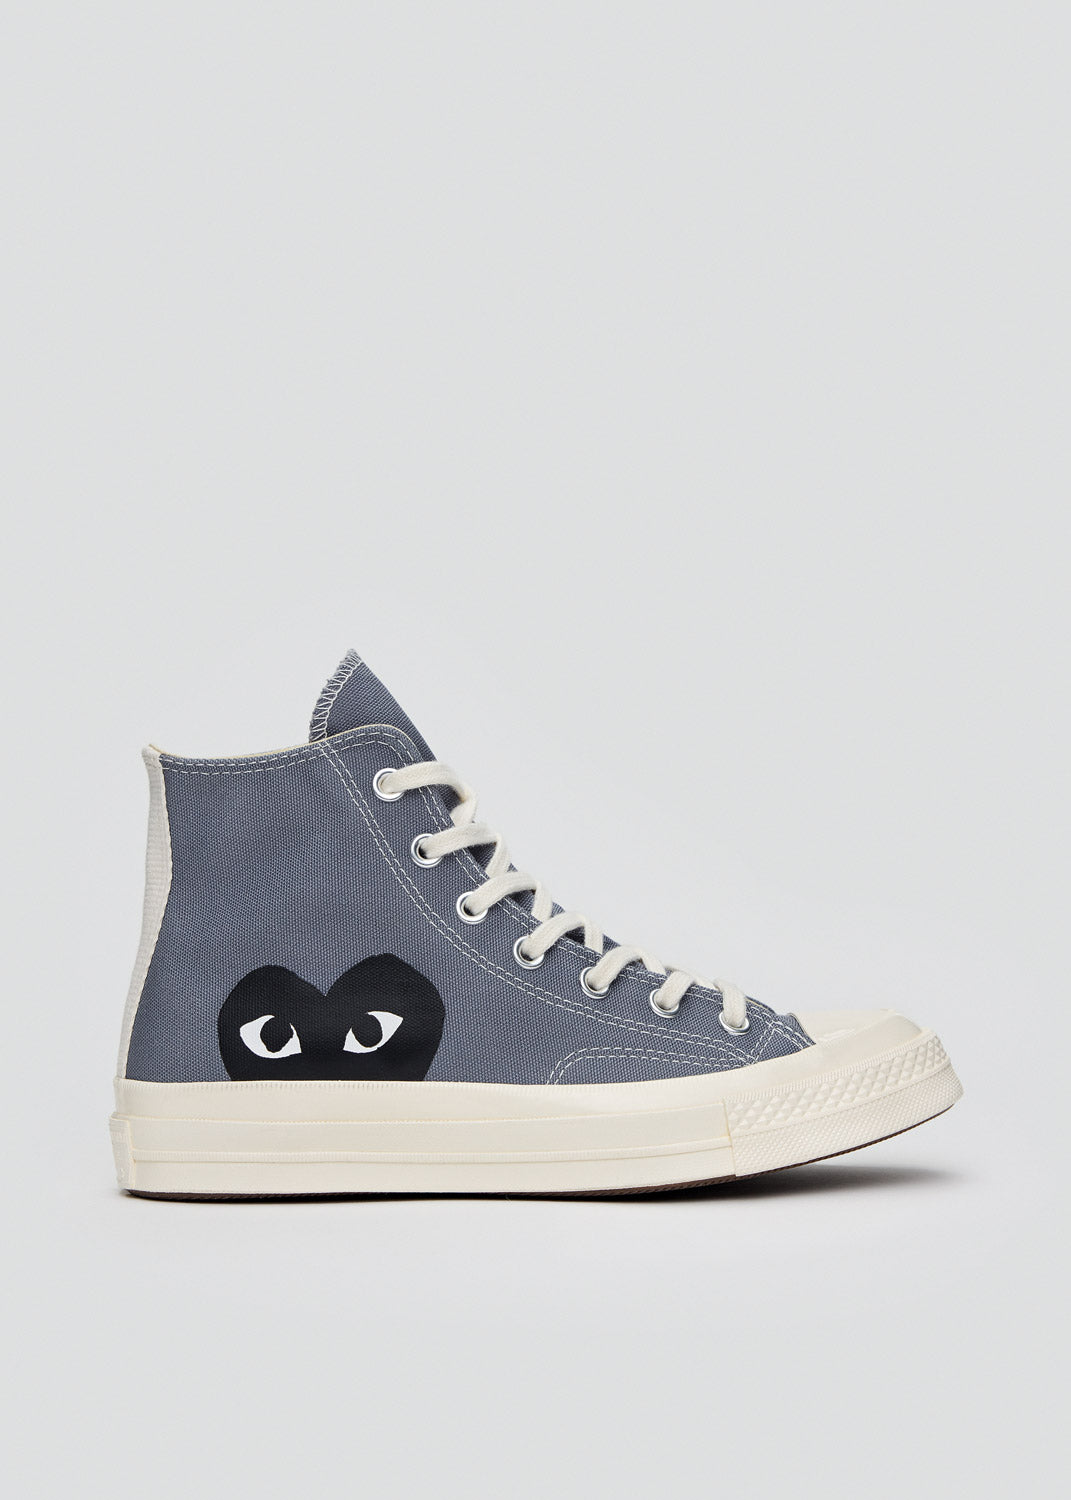 Comme des Garçons PLAY - Grey CDG Chuck 70 High Sneakers | 1032 SPACE 1032 Space